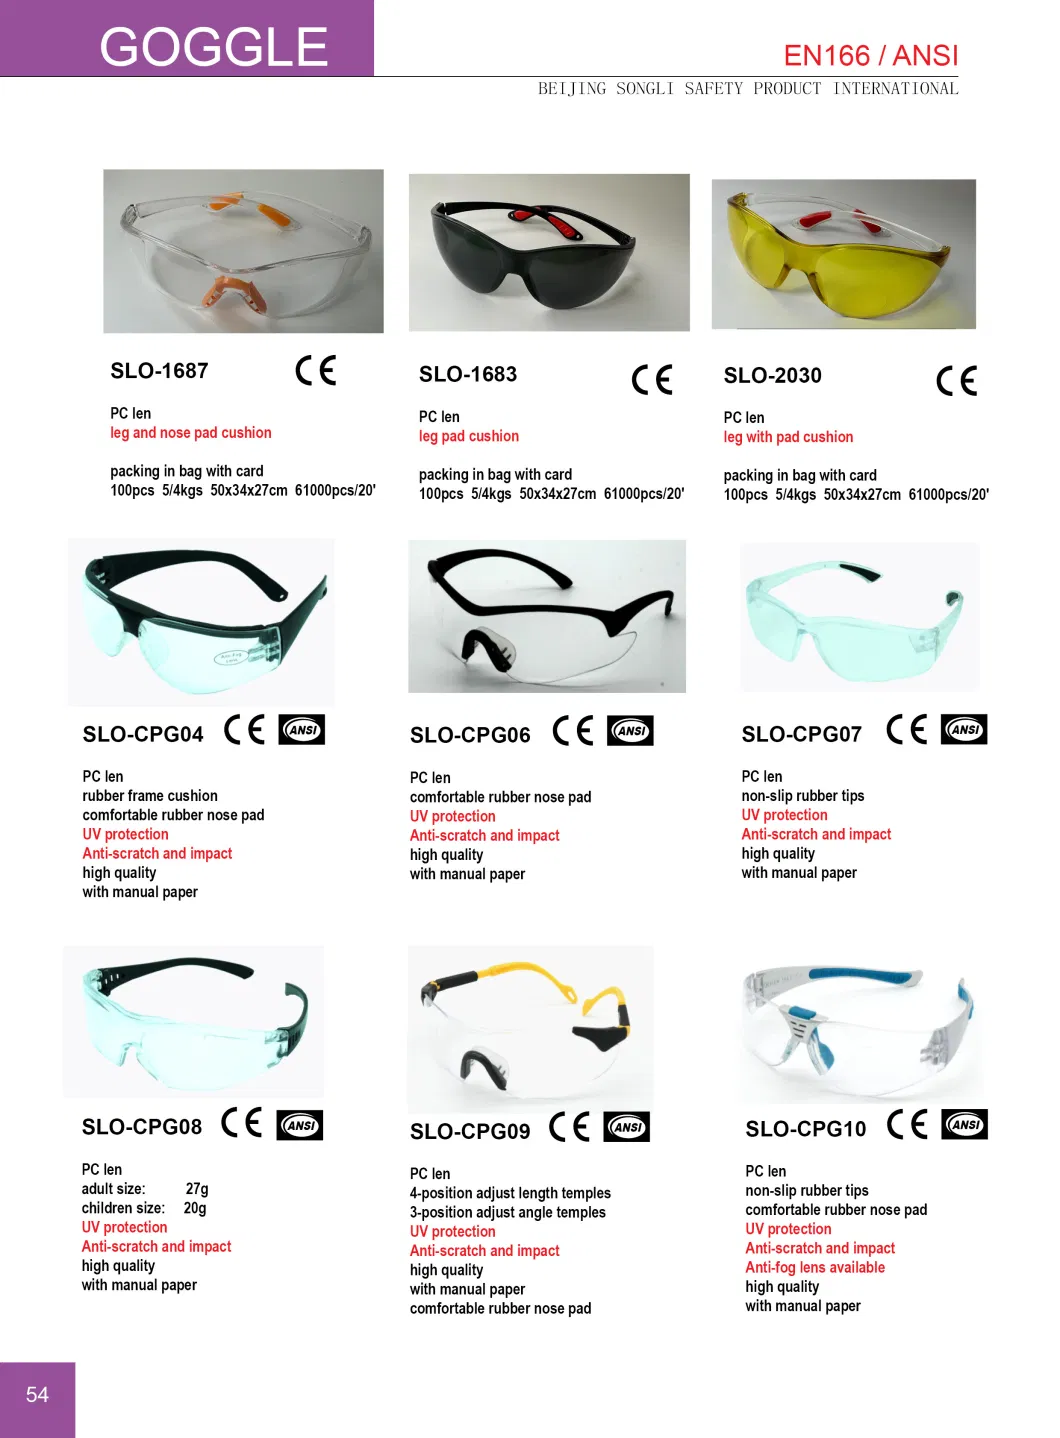 Slo-A8005 Eye Protection Protective Eye Wear Goggle Auto Darken Welding Glasses Safety Glasses